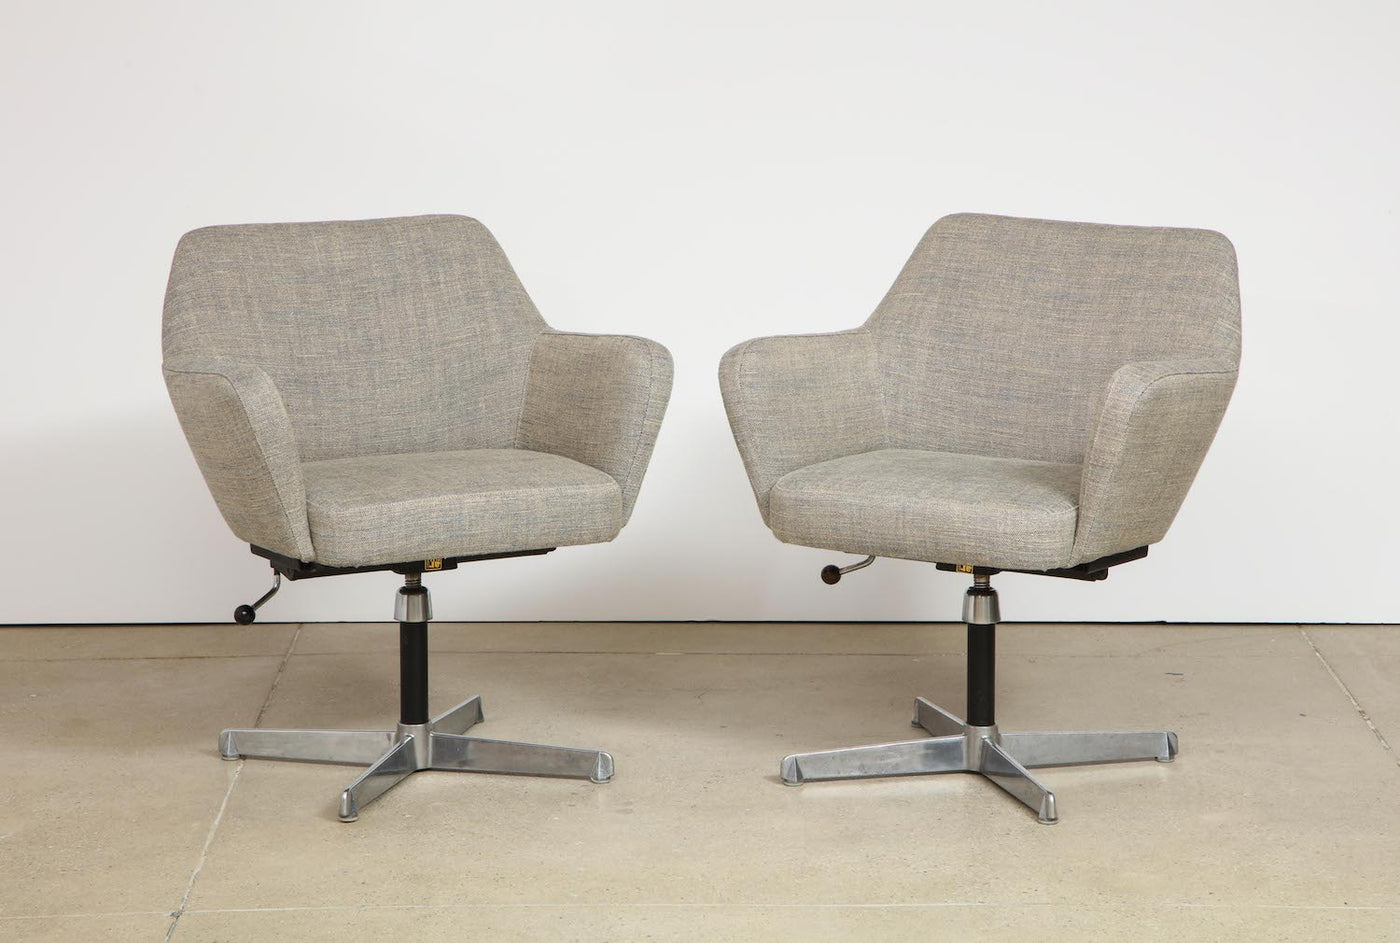 Pair of "Airone" Model Office Chairs by Gio Ponti & Alberto Roselli for Arflex